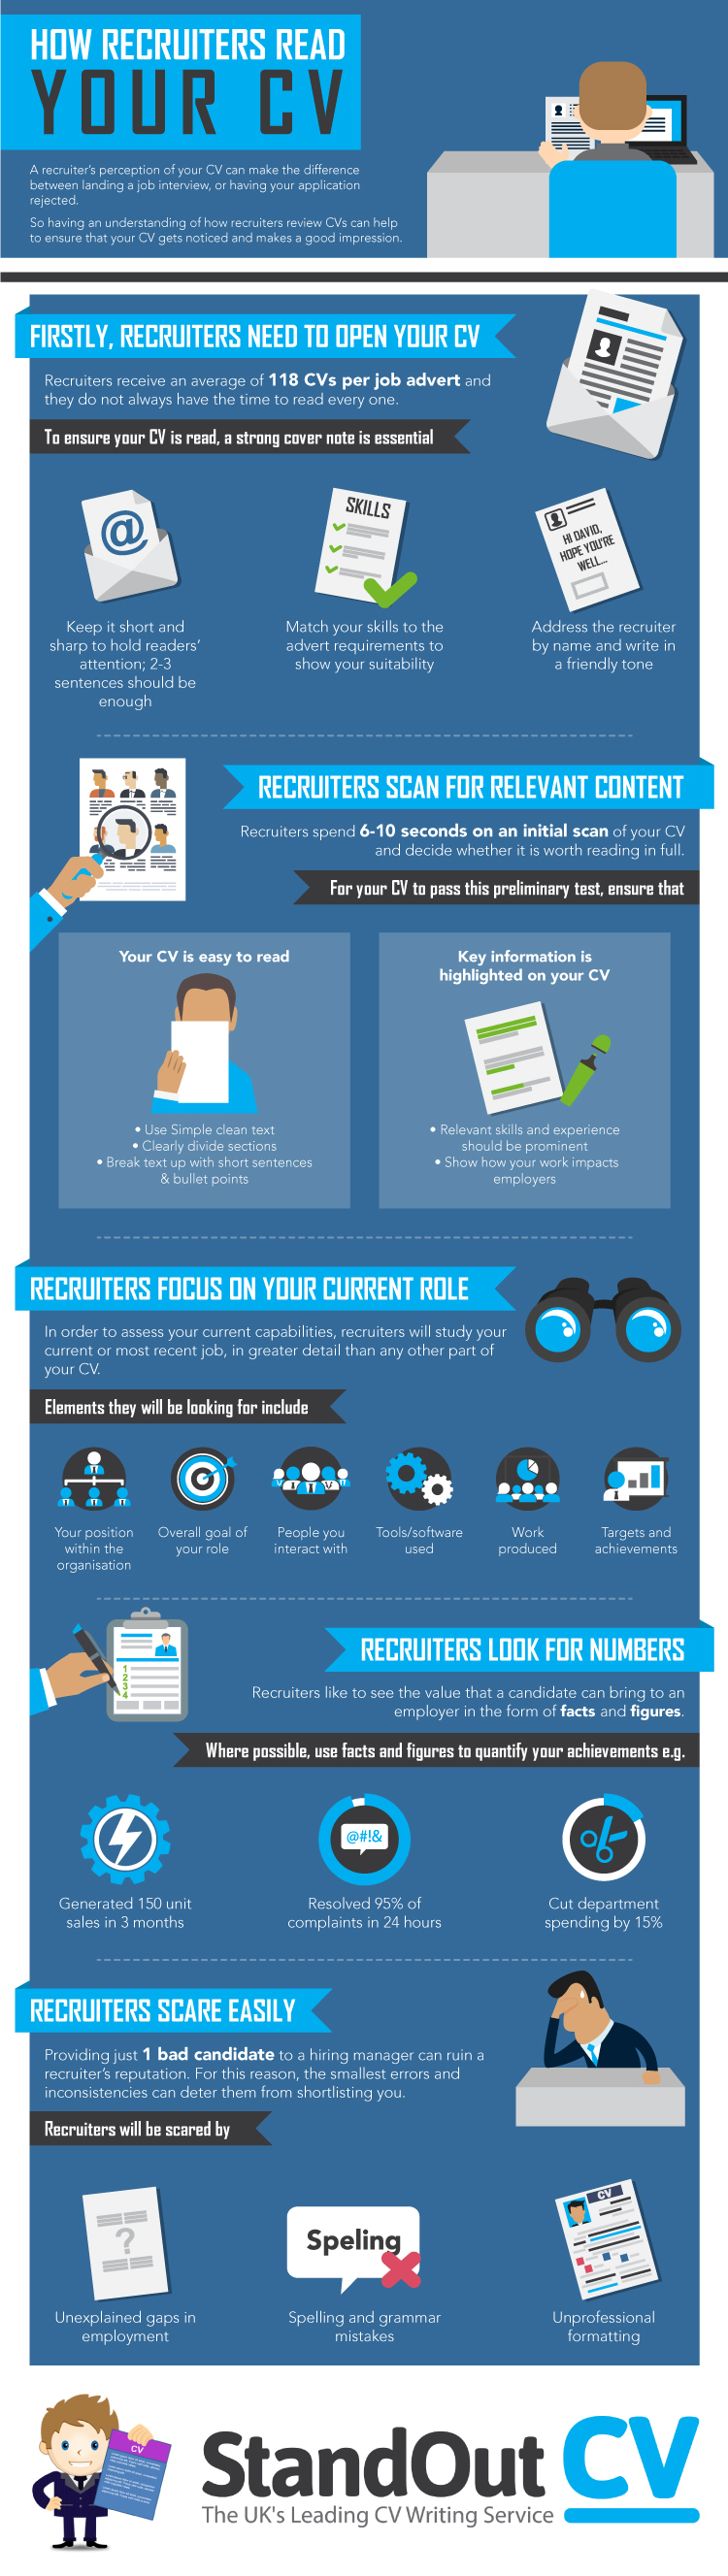 How a recruiter reads your cv